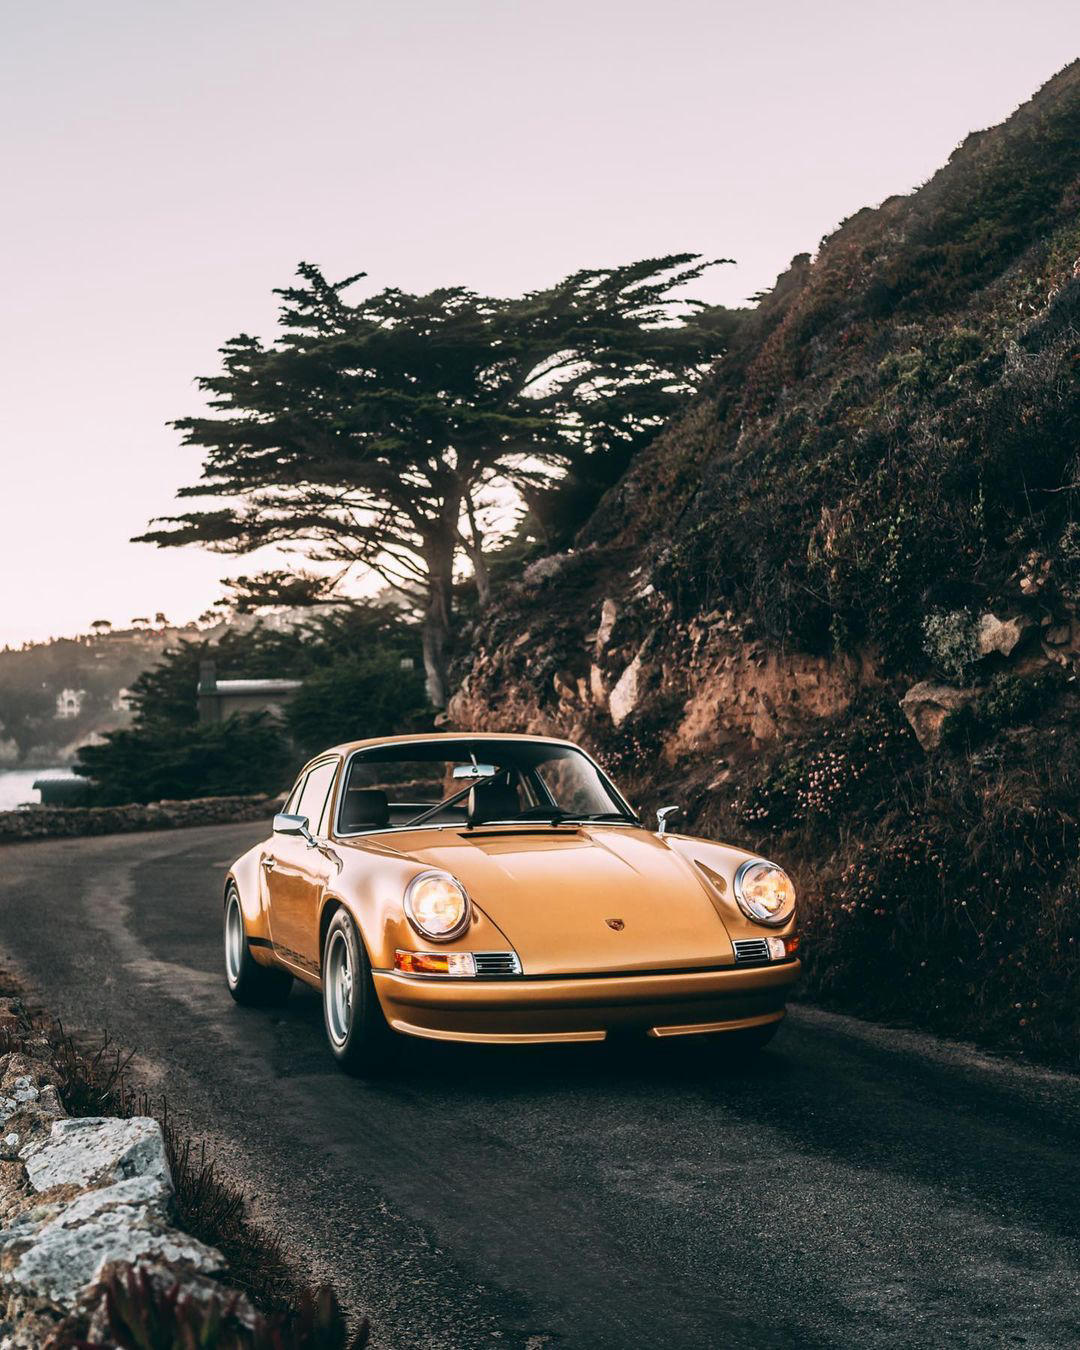 Porsche - This is what we mean when we say, “It’s golden hour